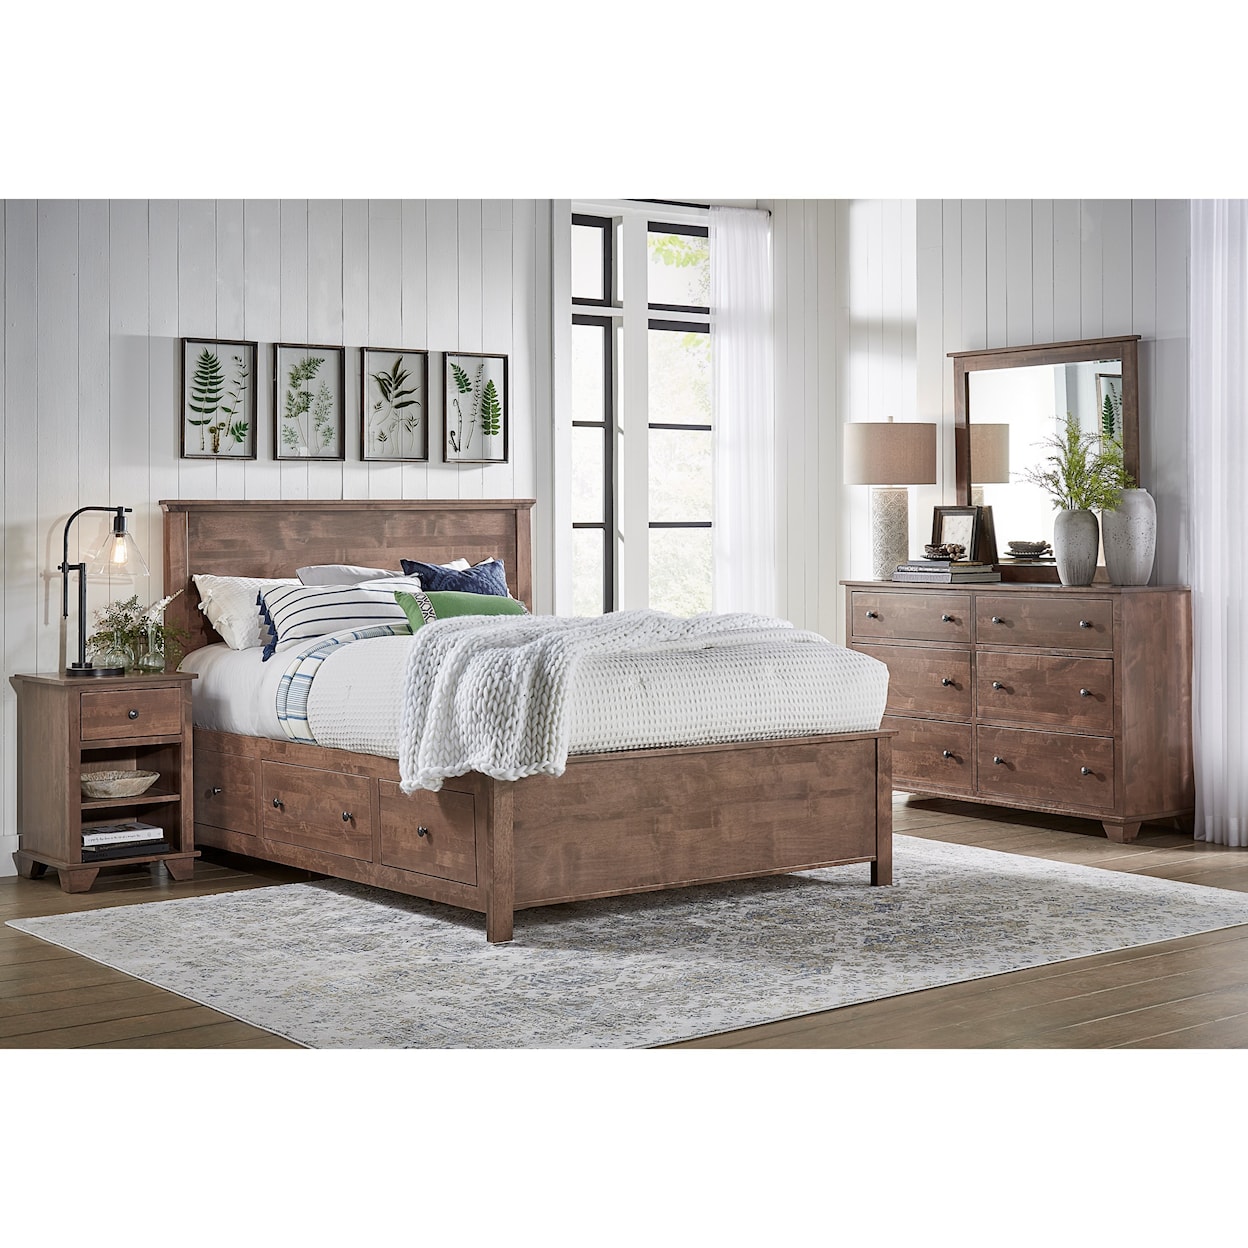 Archbold Furniture Beds Queen Elevated Storage Bed